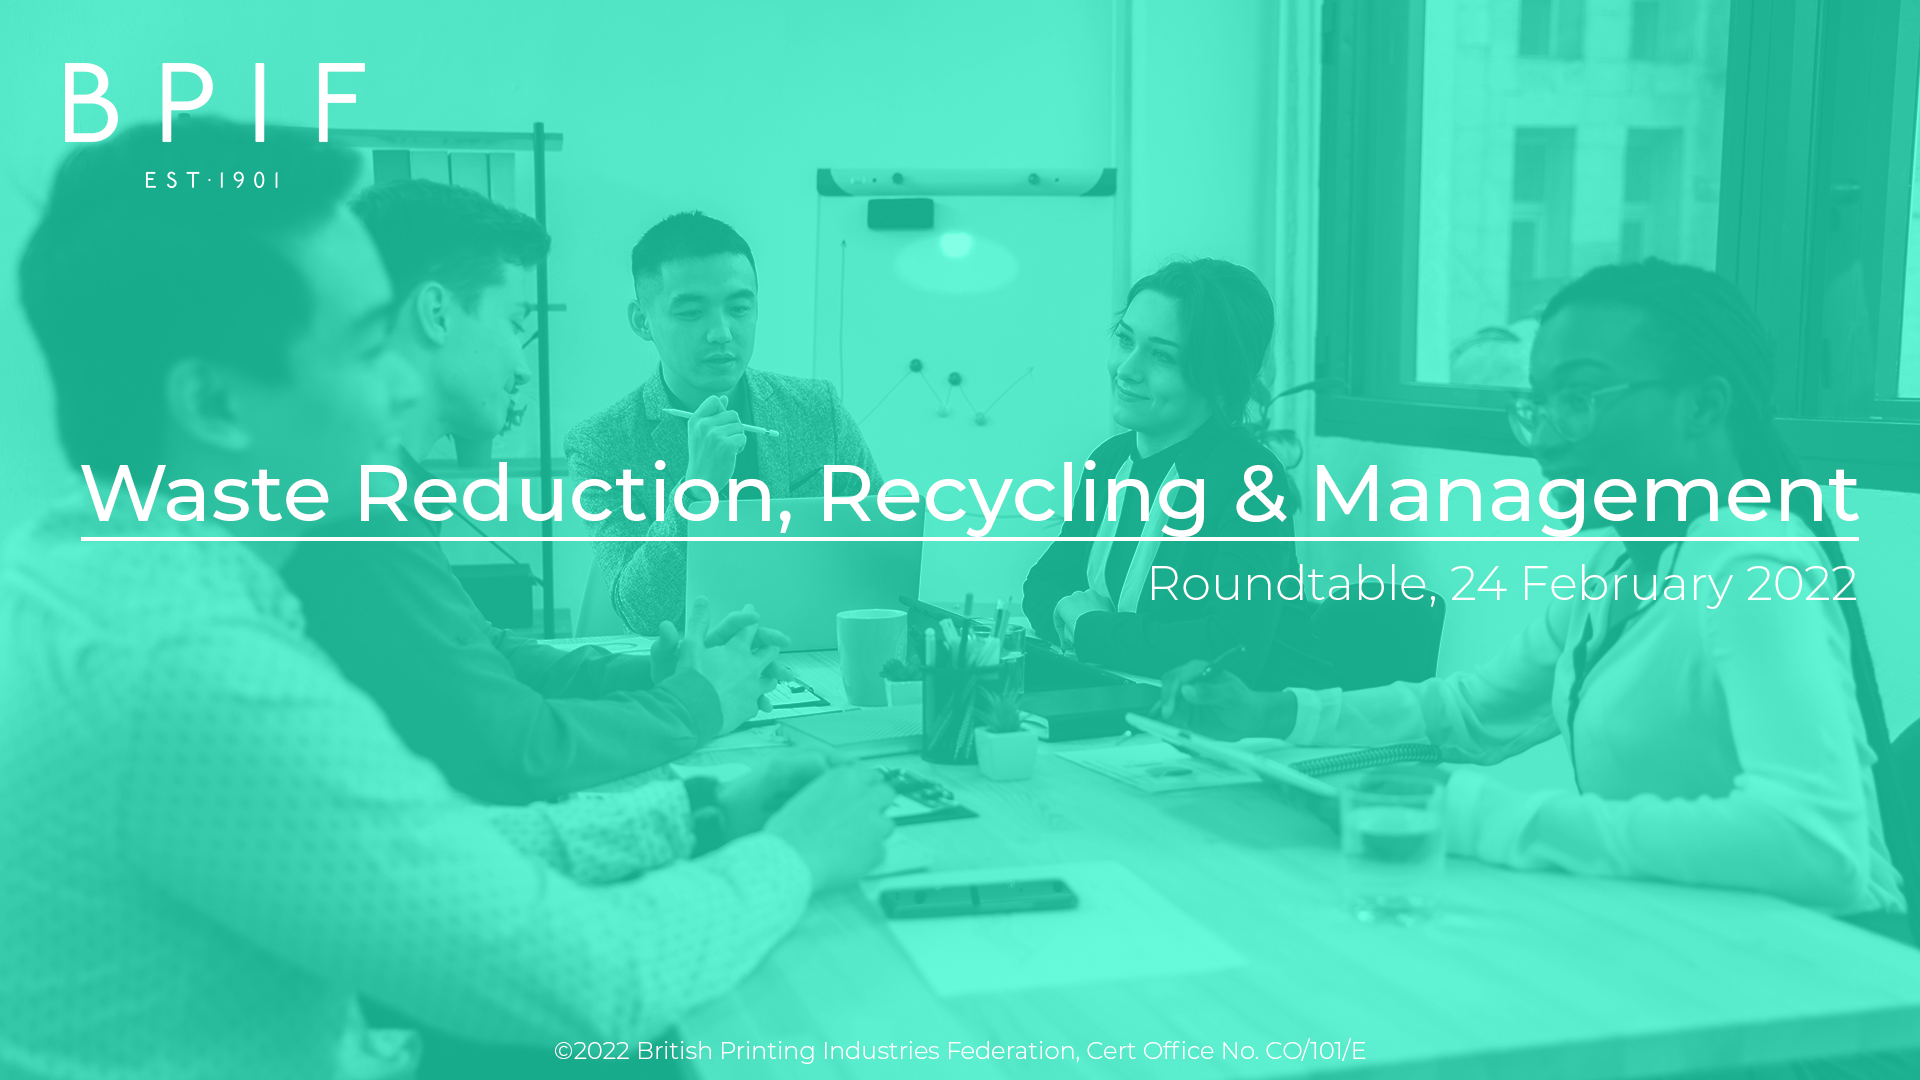 BPIF Waste Reduction, Recycling & Management - Roundtable 24 February 2022